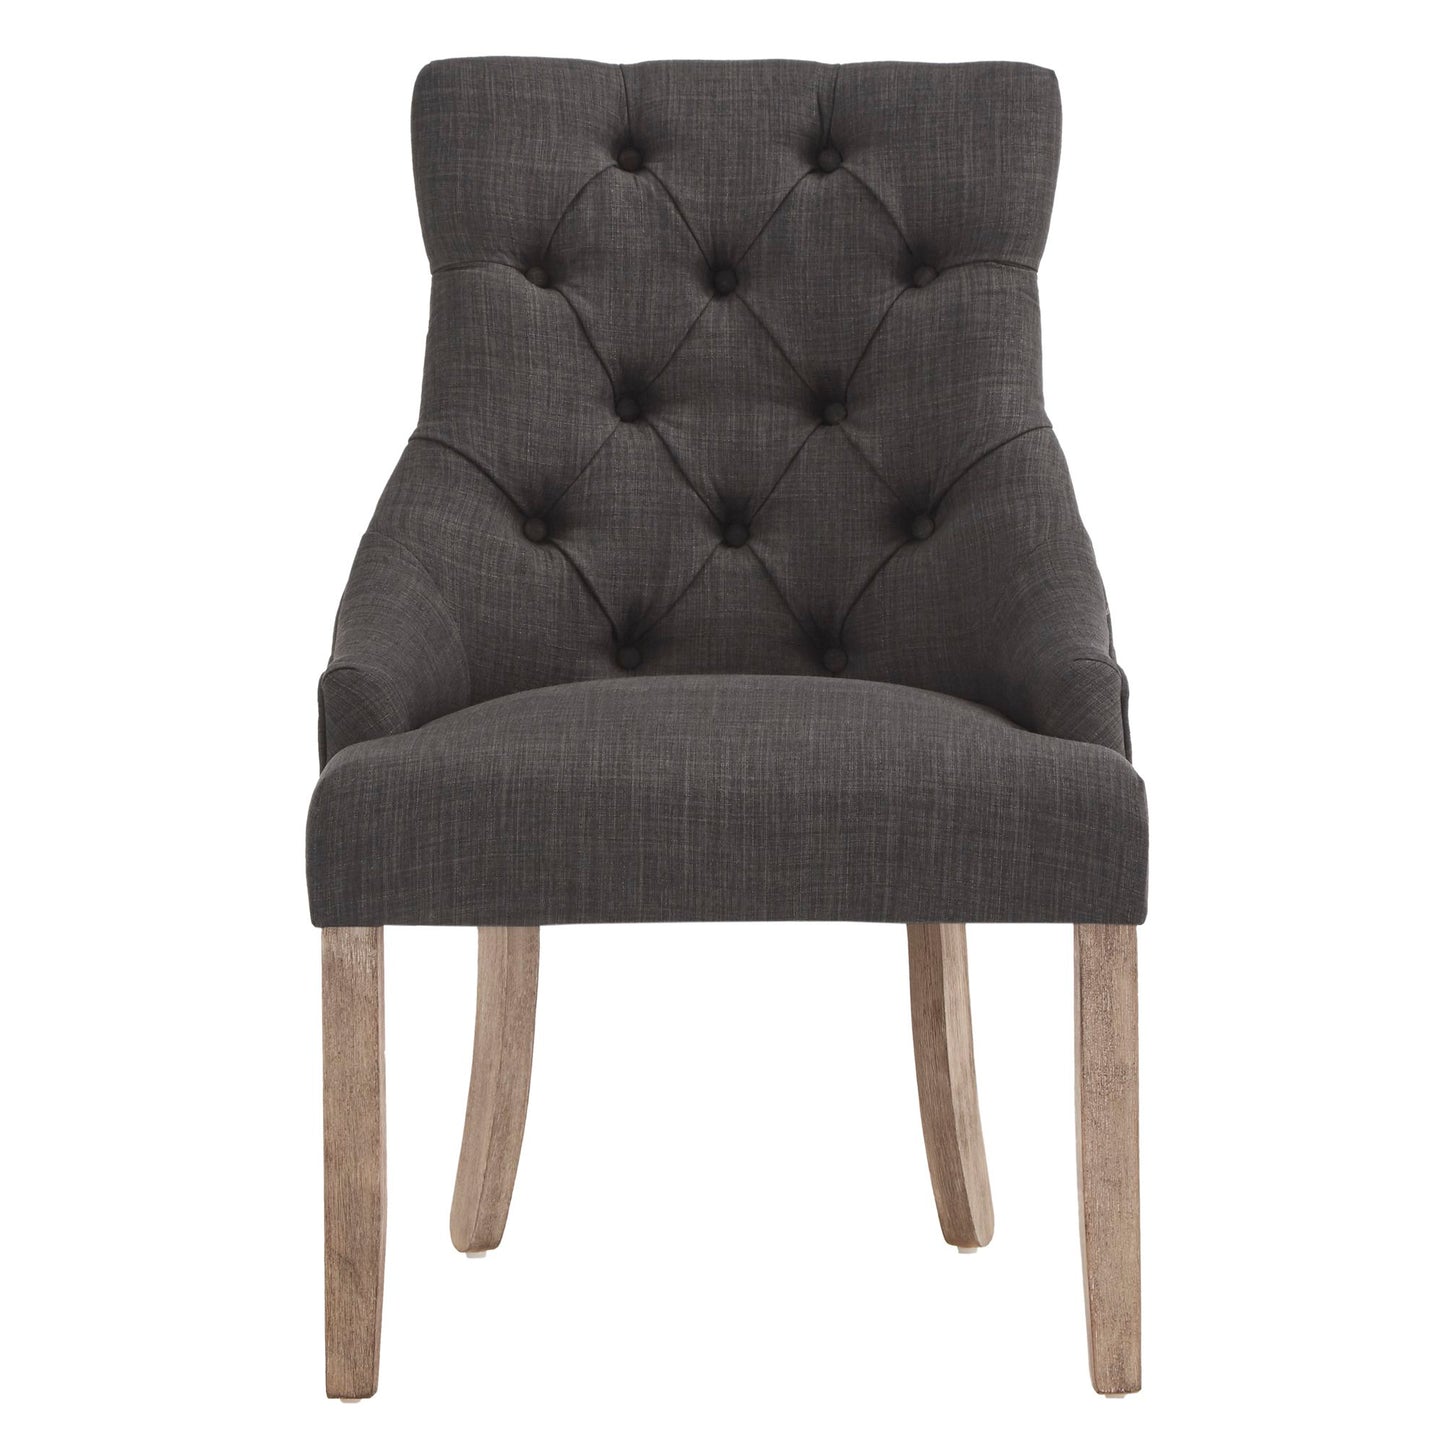 Round 7-Piece Dining Set with Wingback Chairs - Grey Finish, Dark Grey Linen